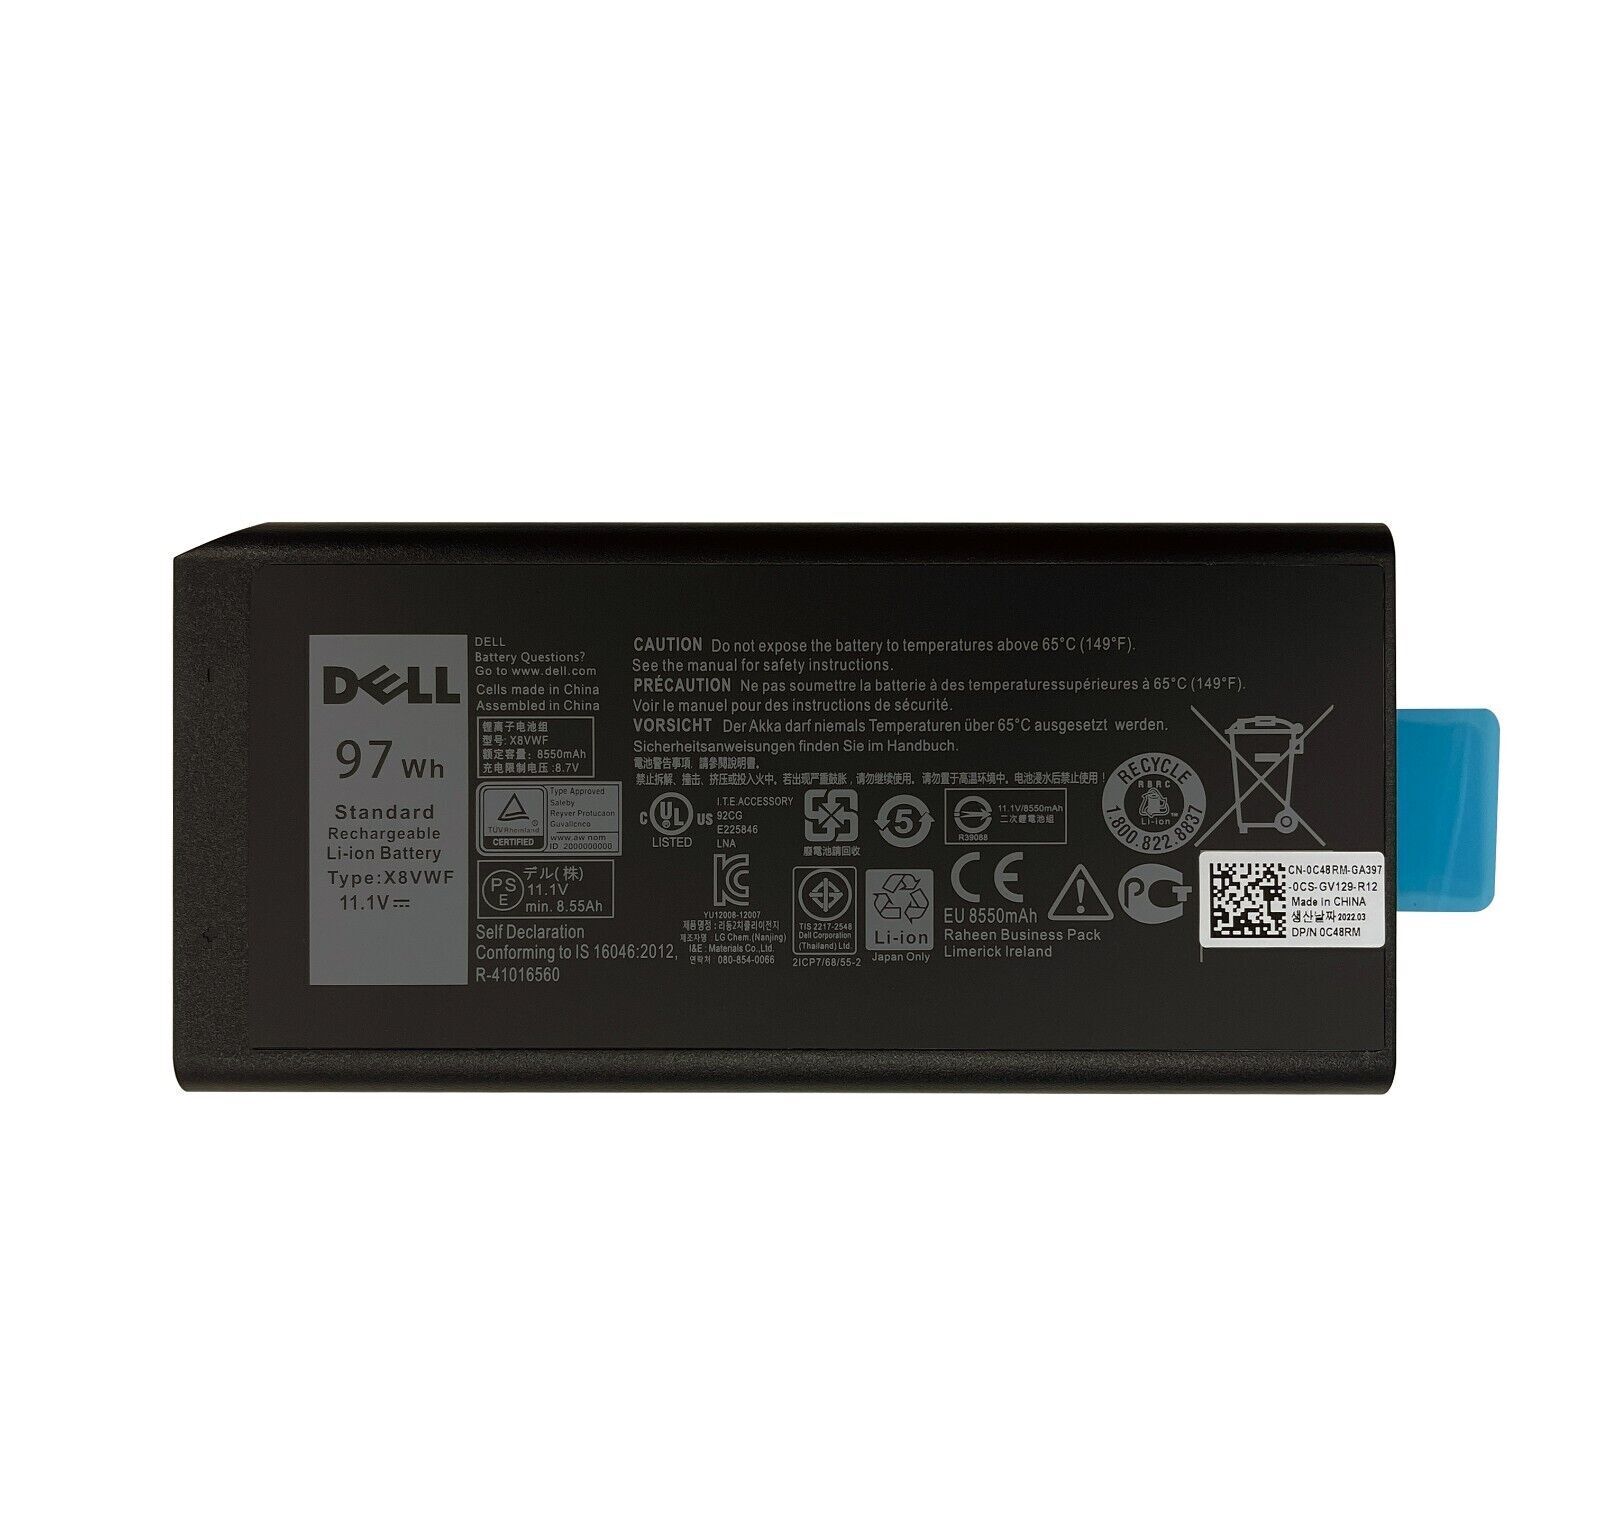 Genuine 97Wh X8VWF Battery for Dell Latitude 14 5404 7404 VCWGN 4XKN5 453-BBBE